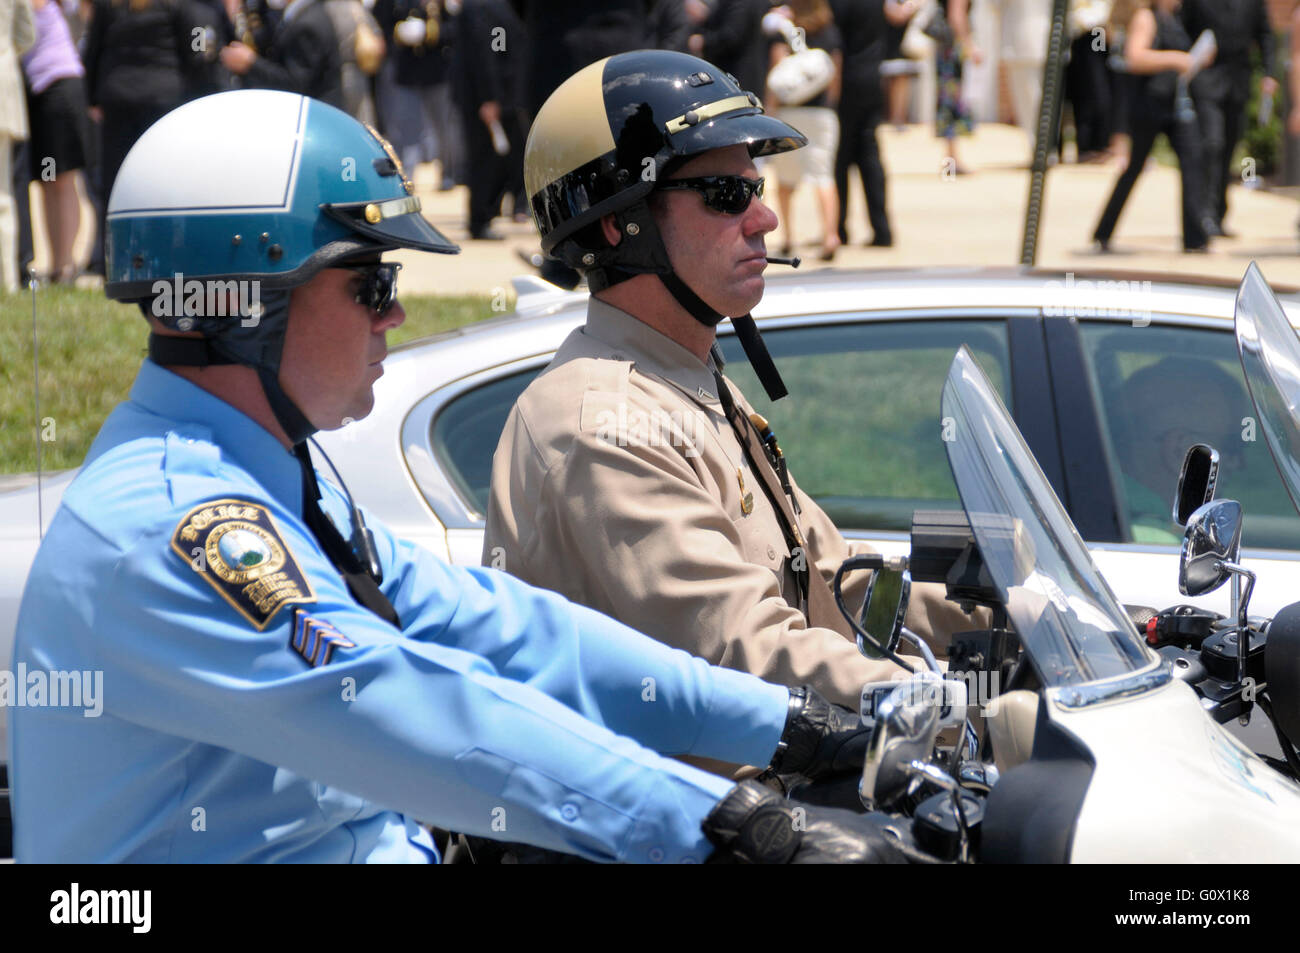 two motorcycle policemen participate in a policeman's funeral in beltsville, maryland Stock Photo